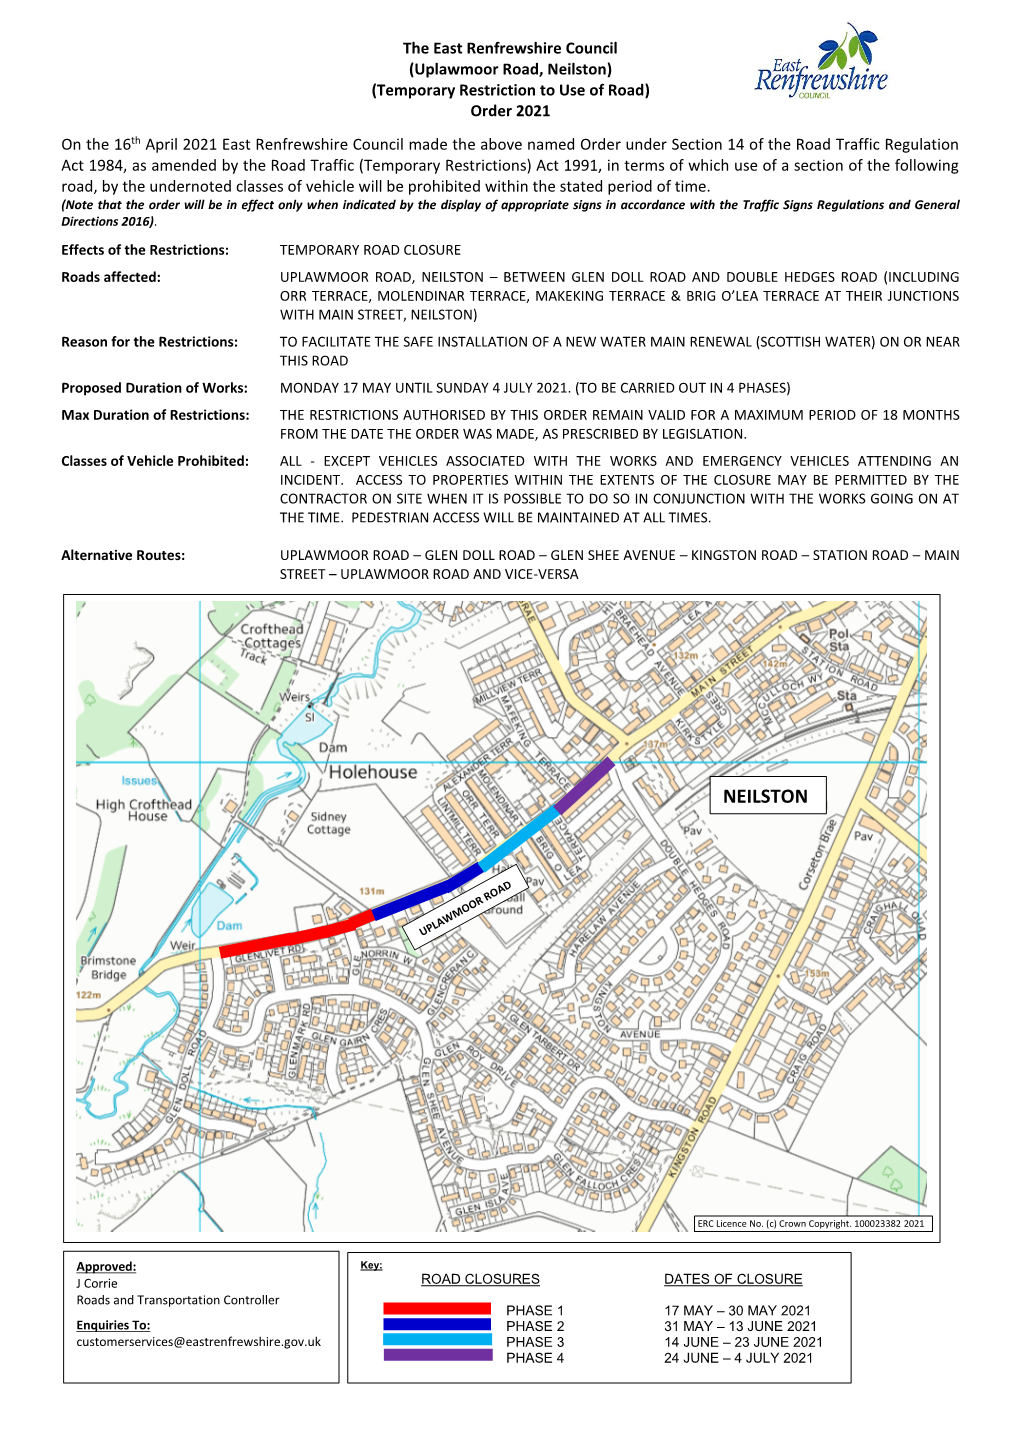 Neilston) (Temporary Restriction to Use of Road) Order 2021